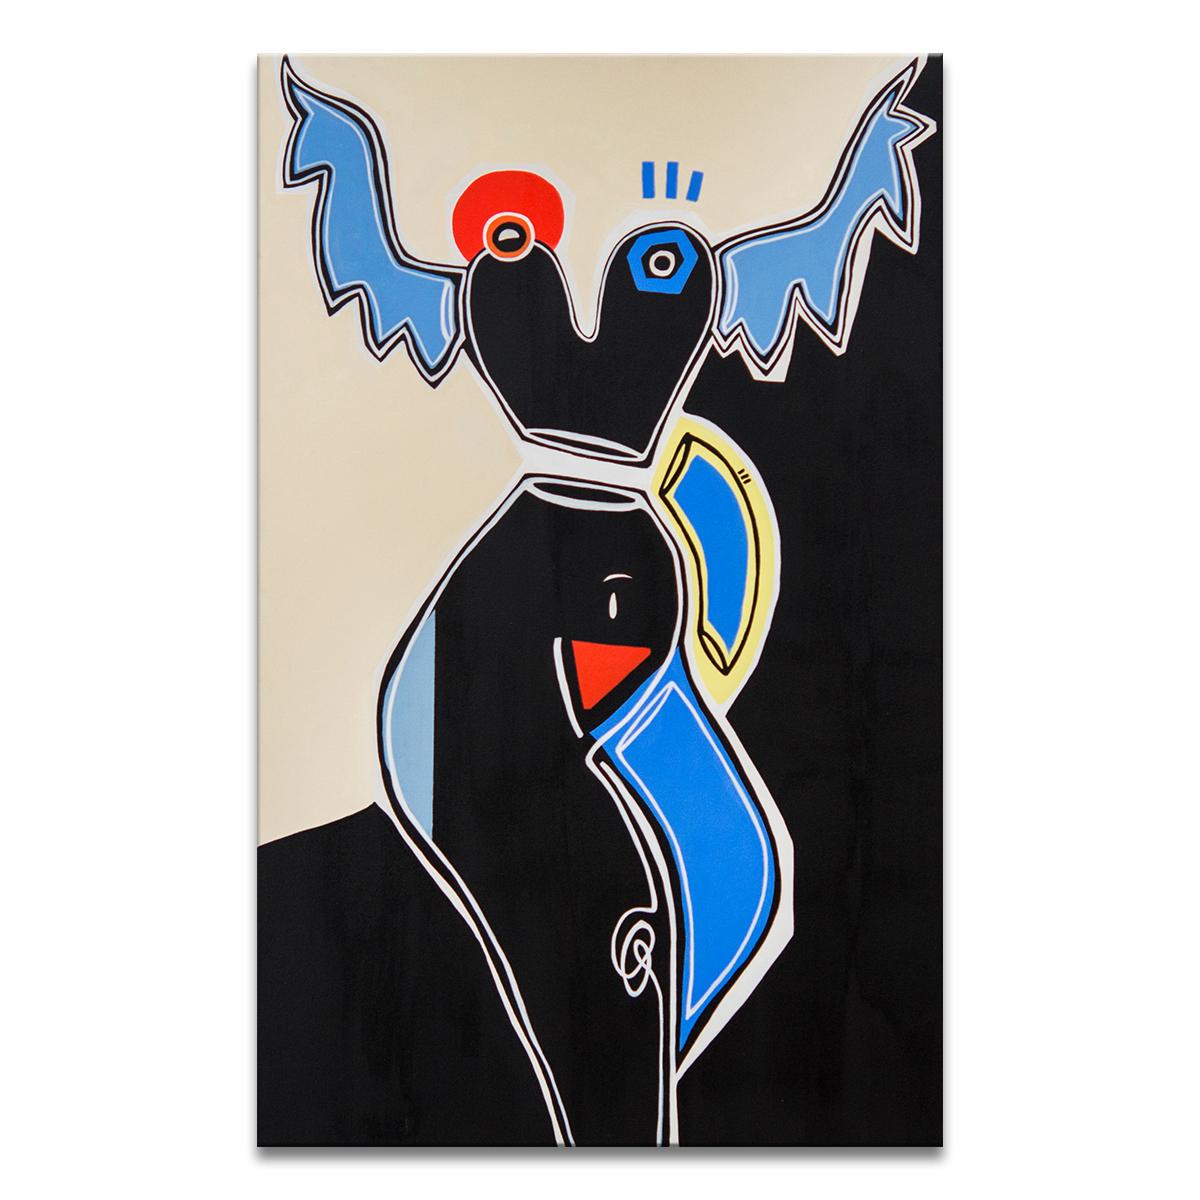 'Pieces of Me' Wrapped Canvas Original Painting features an abstract female figure with wings in vivid tones of blue, red, beige, yellow, and black. Exuding empowerment, Alejandra Linares’s artwork is a collective of rich color and strong abstract